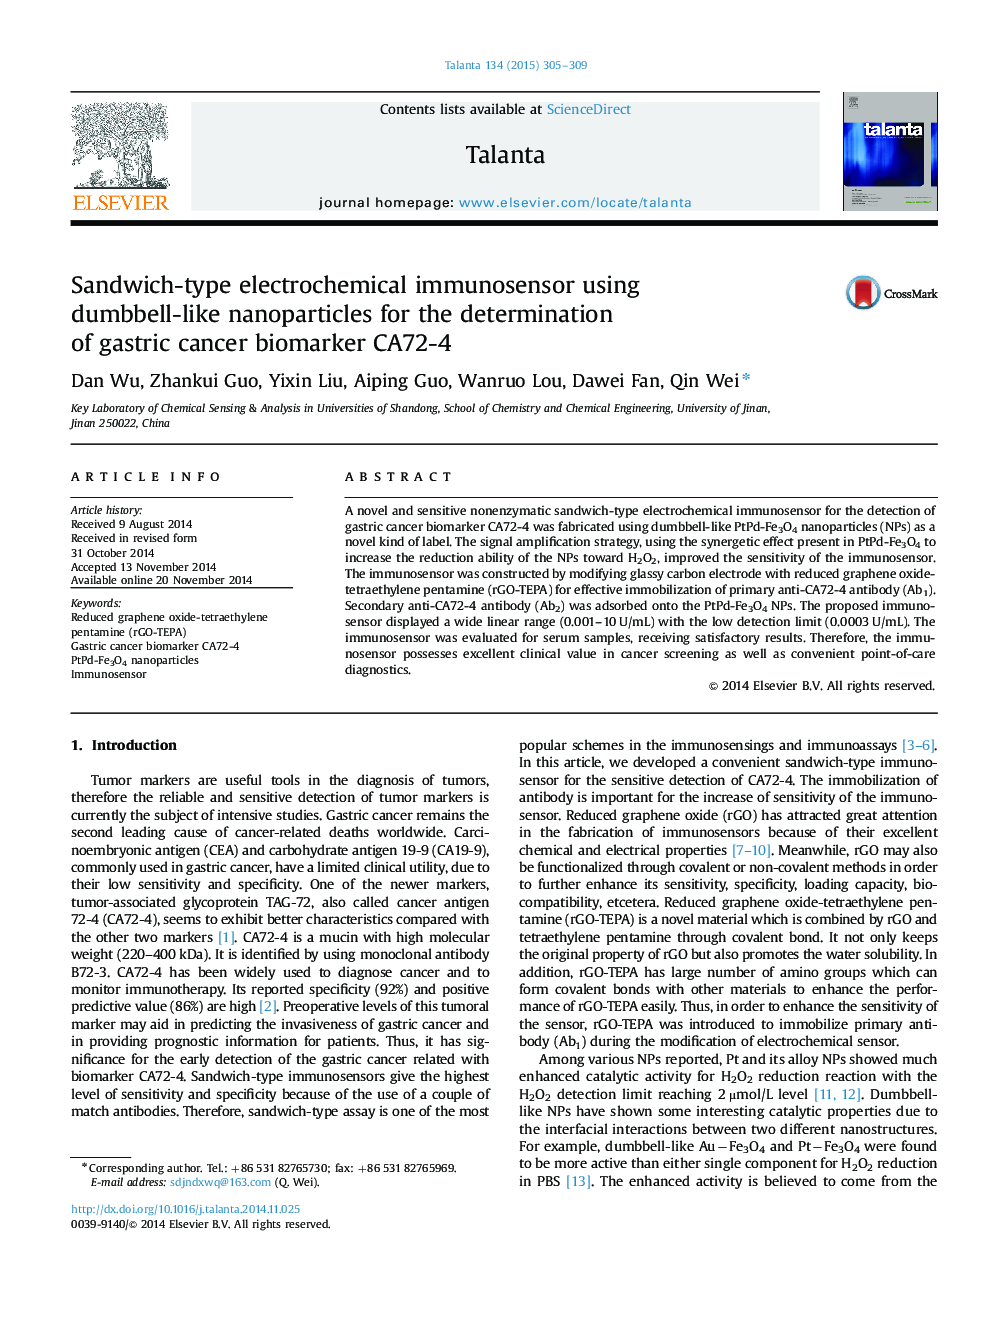 Sandwich-type electrochemical immunosensor using dumbbell-like nanoparticles for the determination of gastric cancer biomarker CA72-4